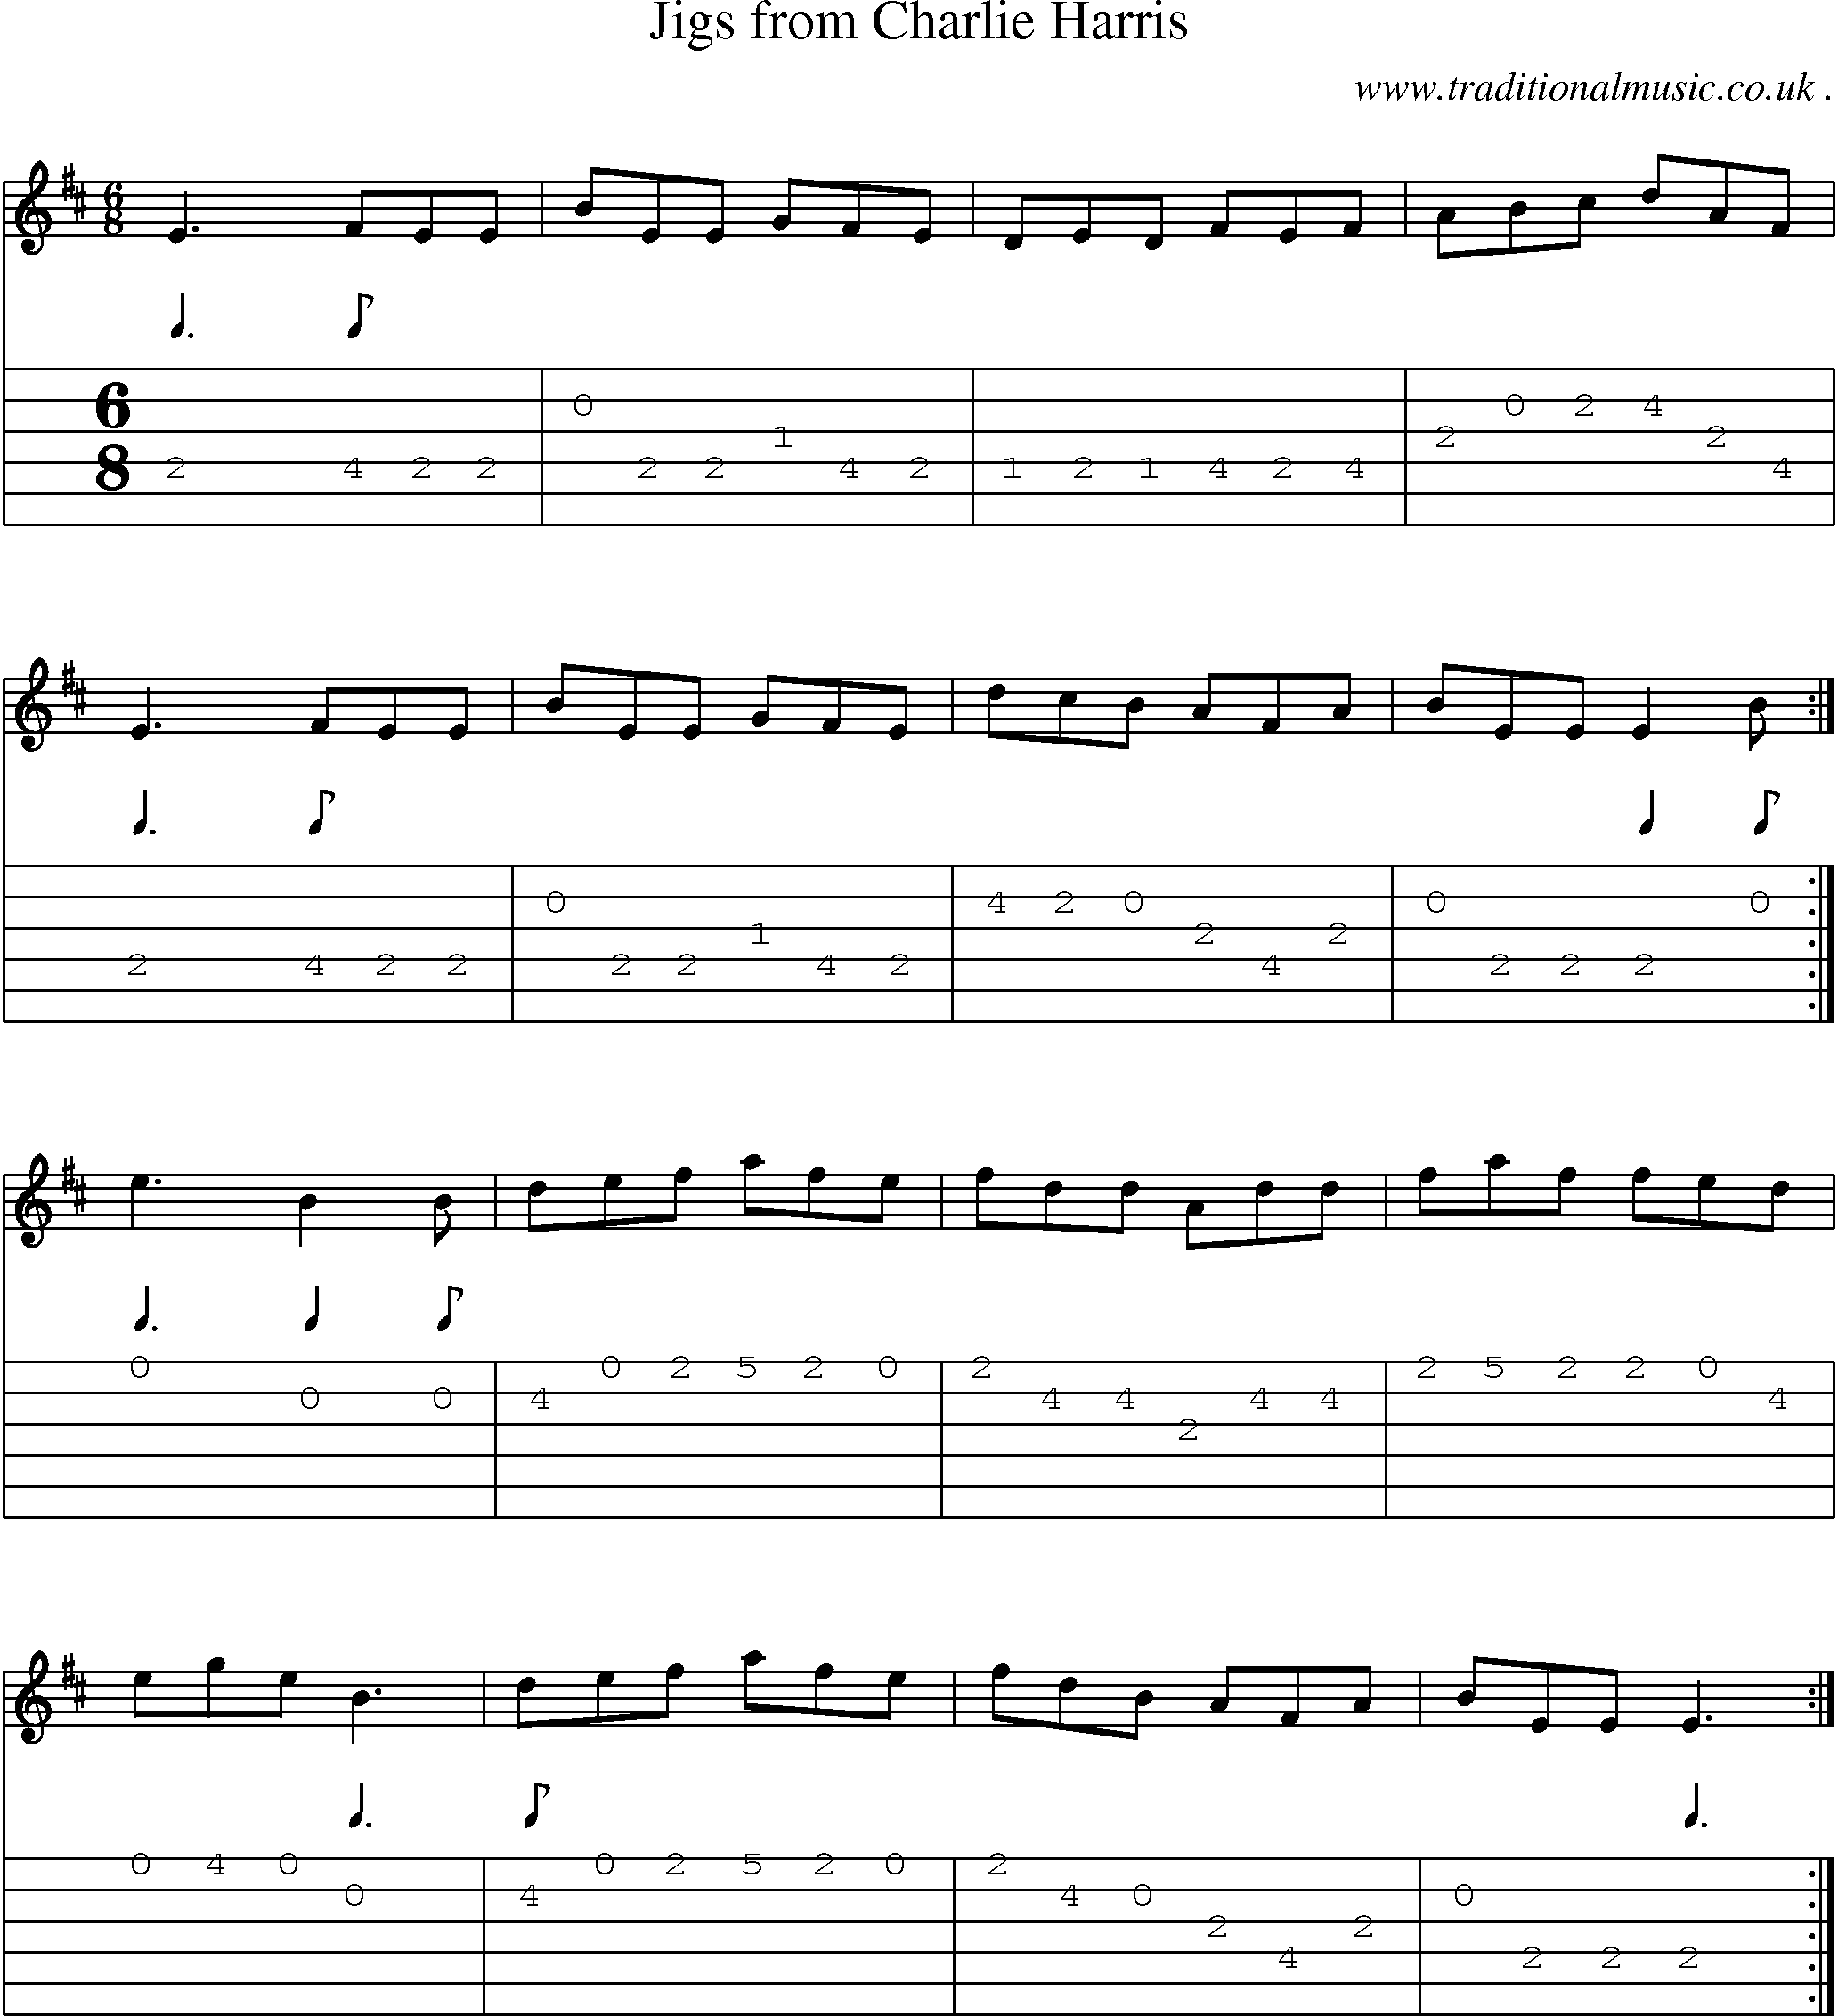 Sheet-Music and Guitar Tabs for Jigs From Charlie Harris